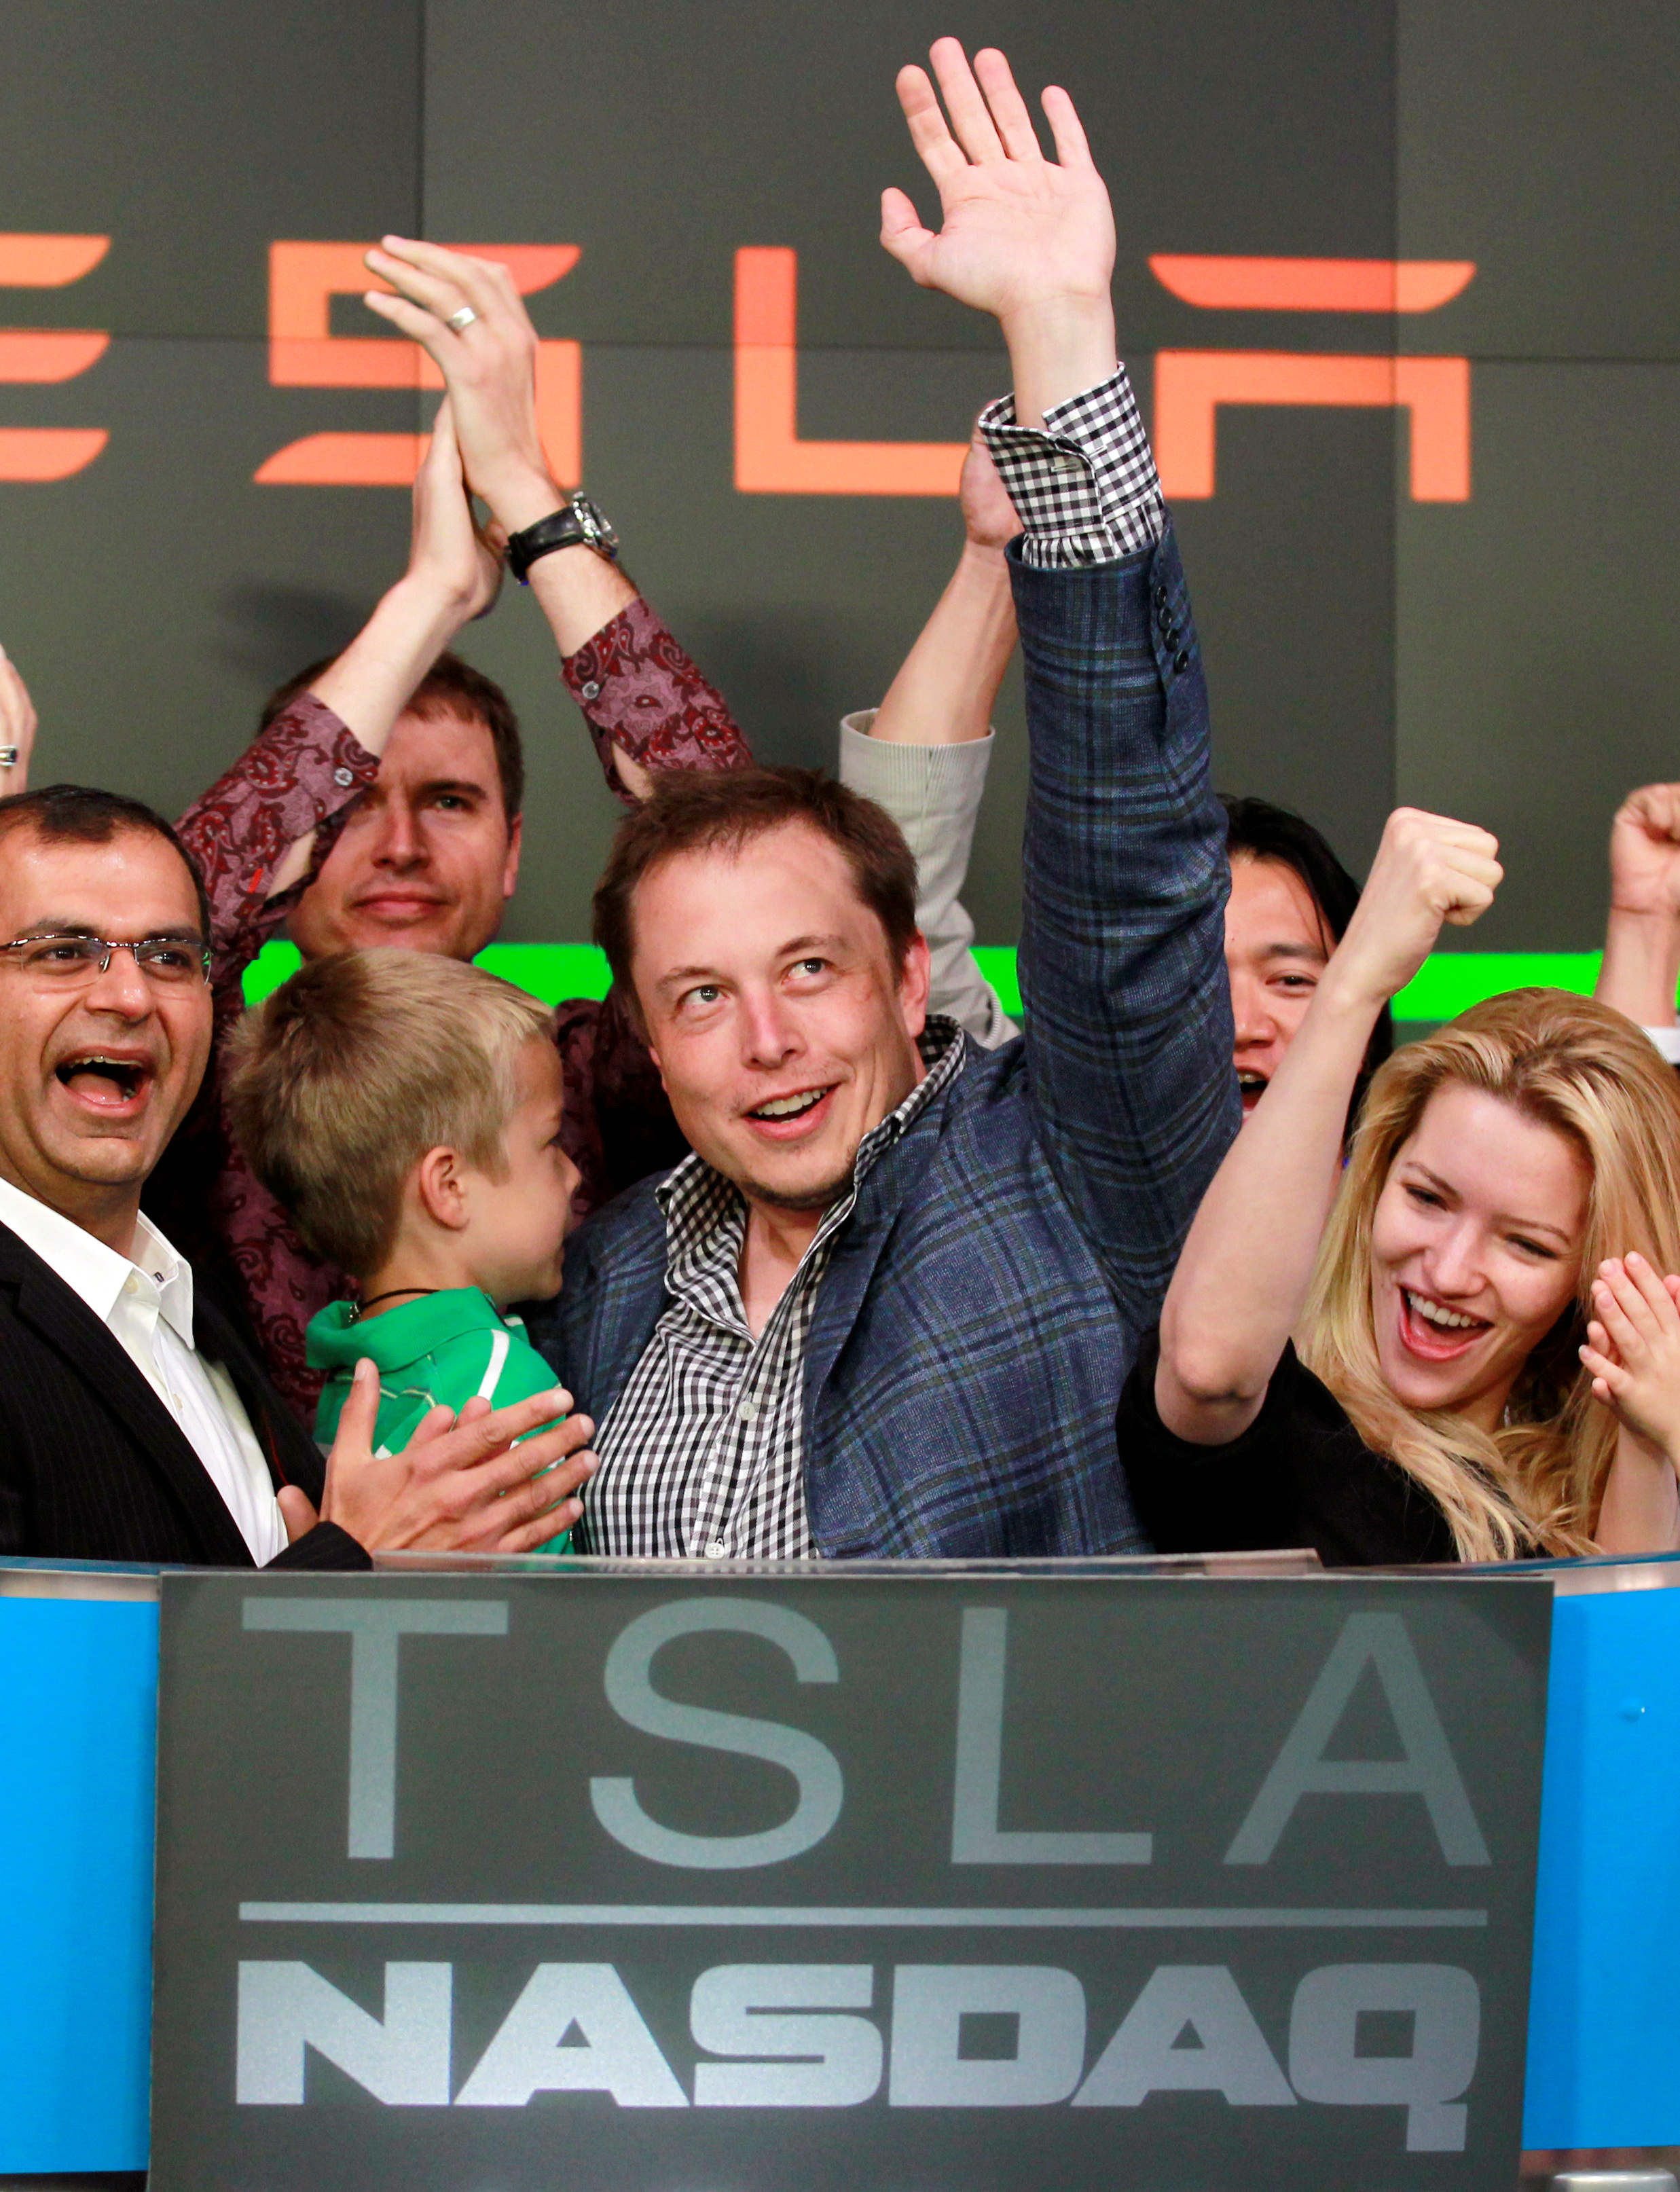 CEO of Tesla Motors Elon Musk waves after ringing the opening bell at the NASDAQ market in celebration of his company's initial public offering in New York June 29, 2010. REUTERS/Brendan McDermid/File Photo